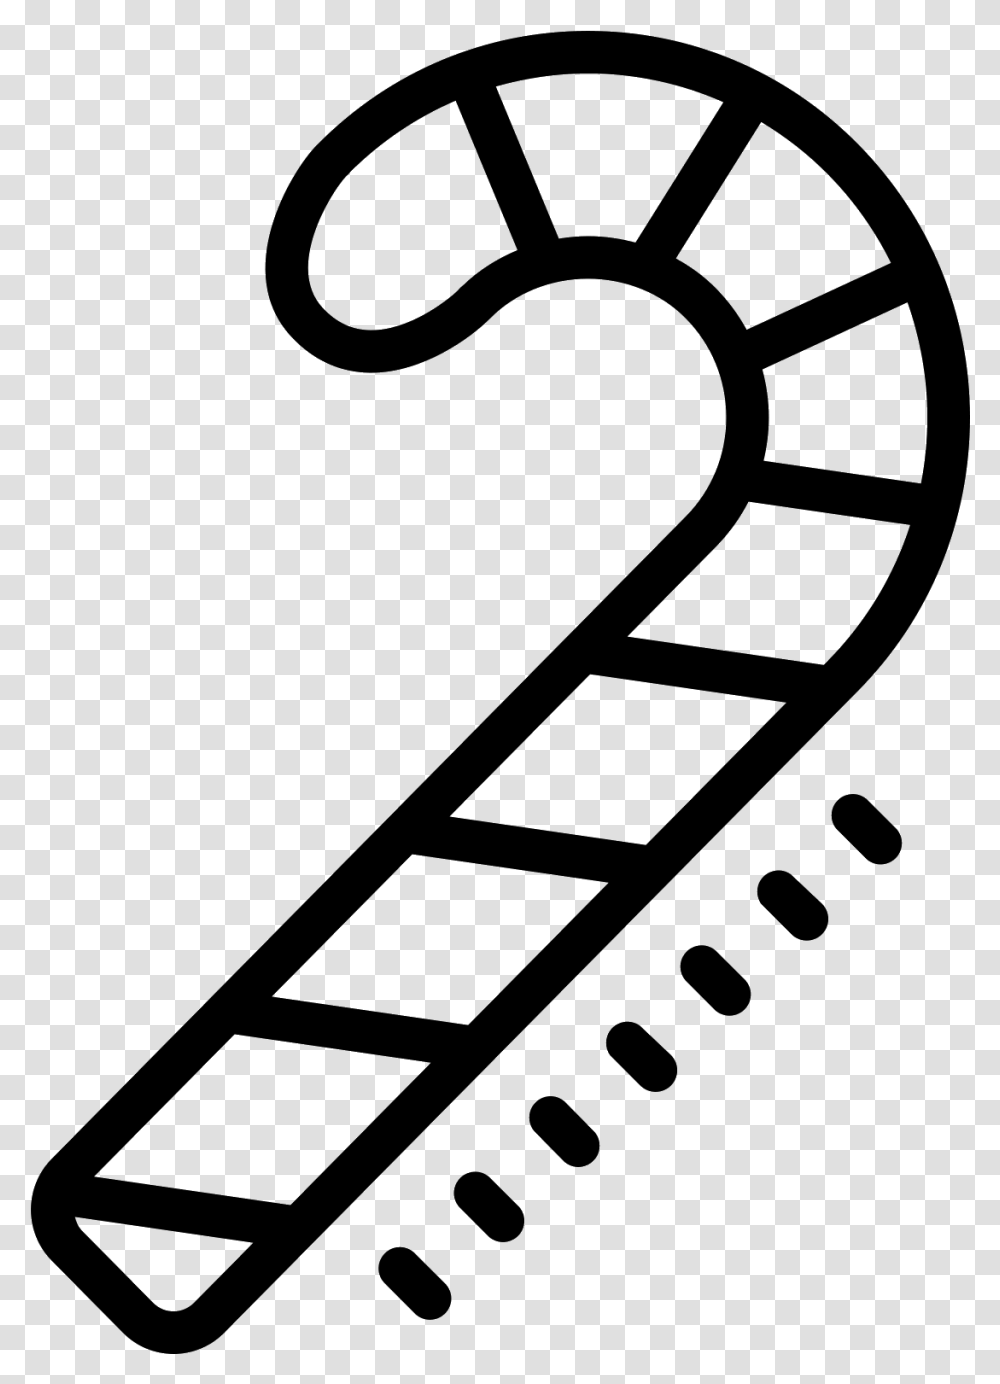 A Candy Cane The Universal Sign For Christmas Black White Candy Cane Transparent Png